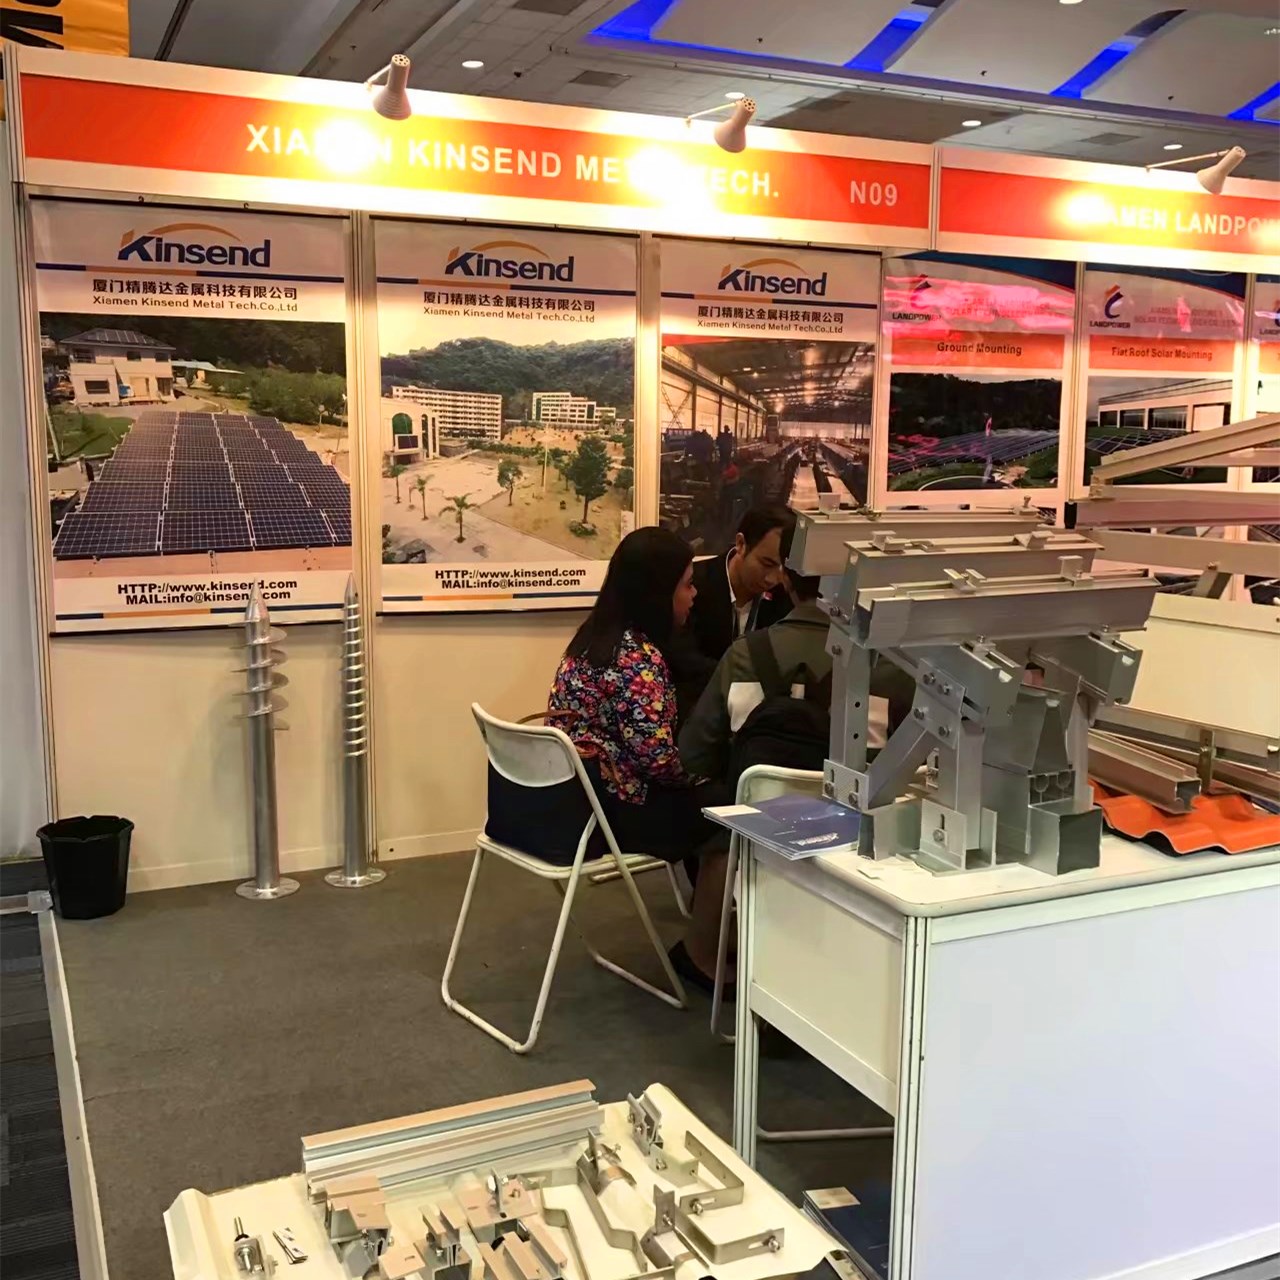 Kinsend exhibited at The Solar Show Philippines 2017